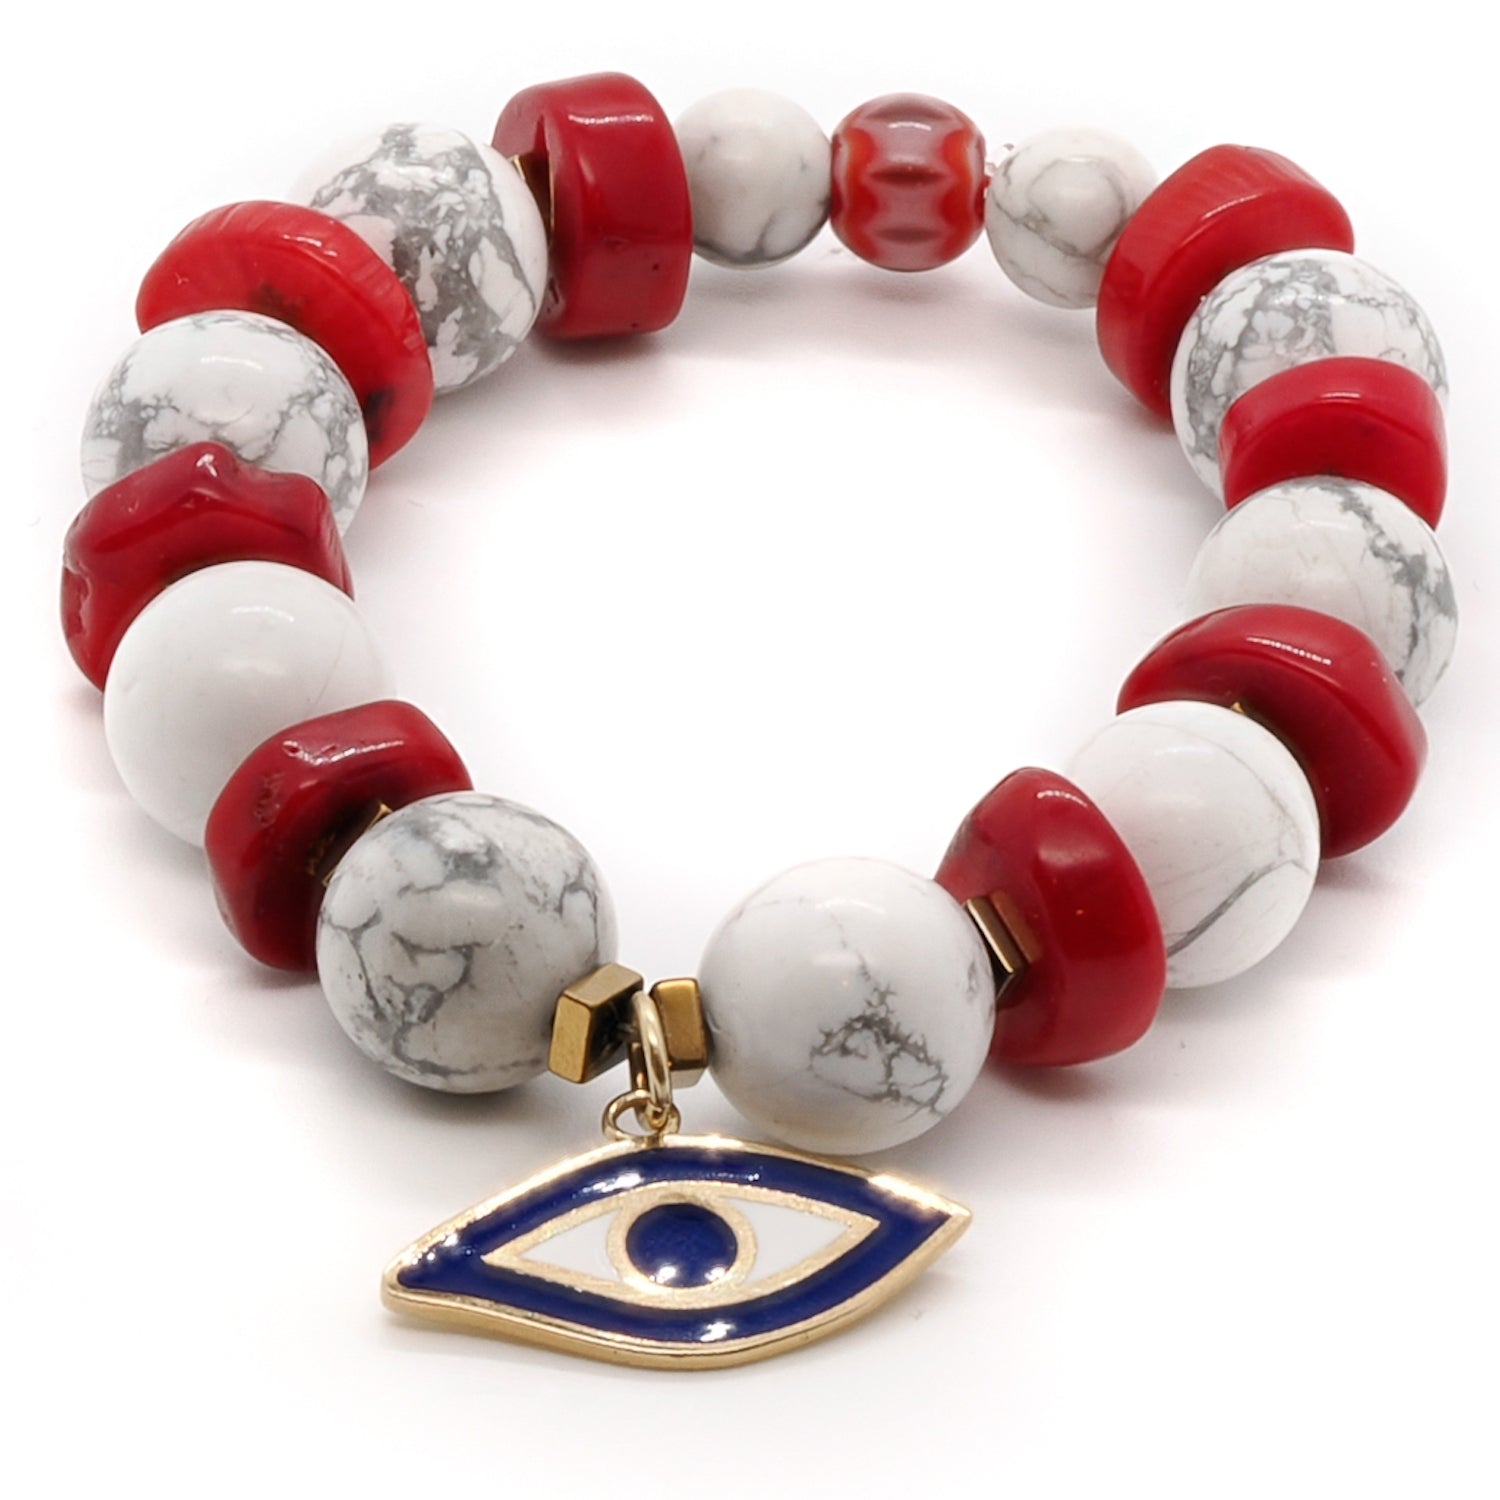 Embrace peace and clarity with the Spiritual Beads Evil Eye Bracelet, handmade with white howlite and red coral stones.